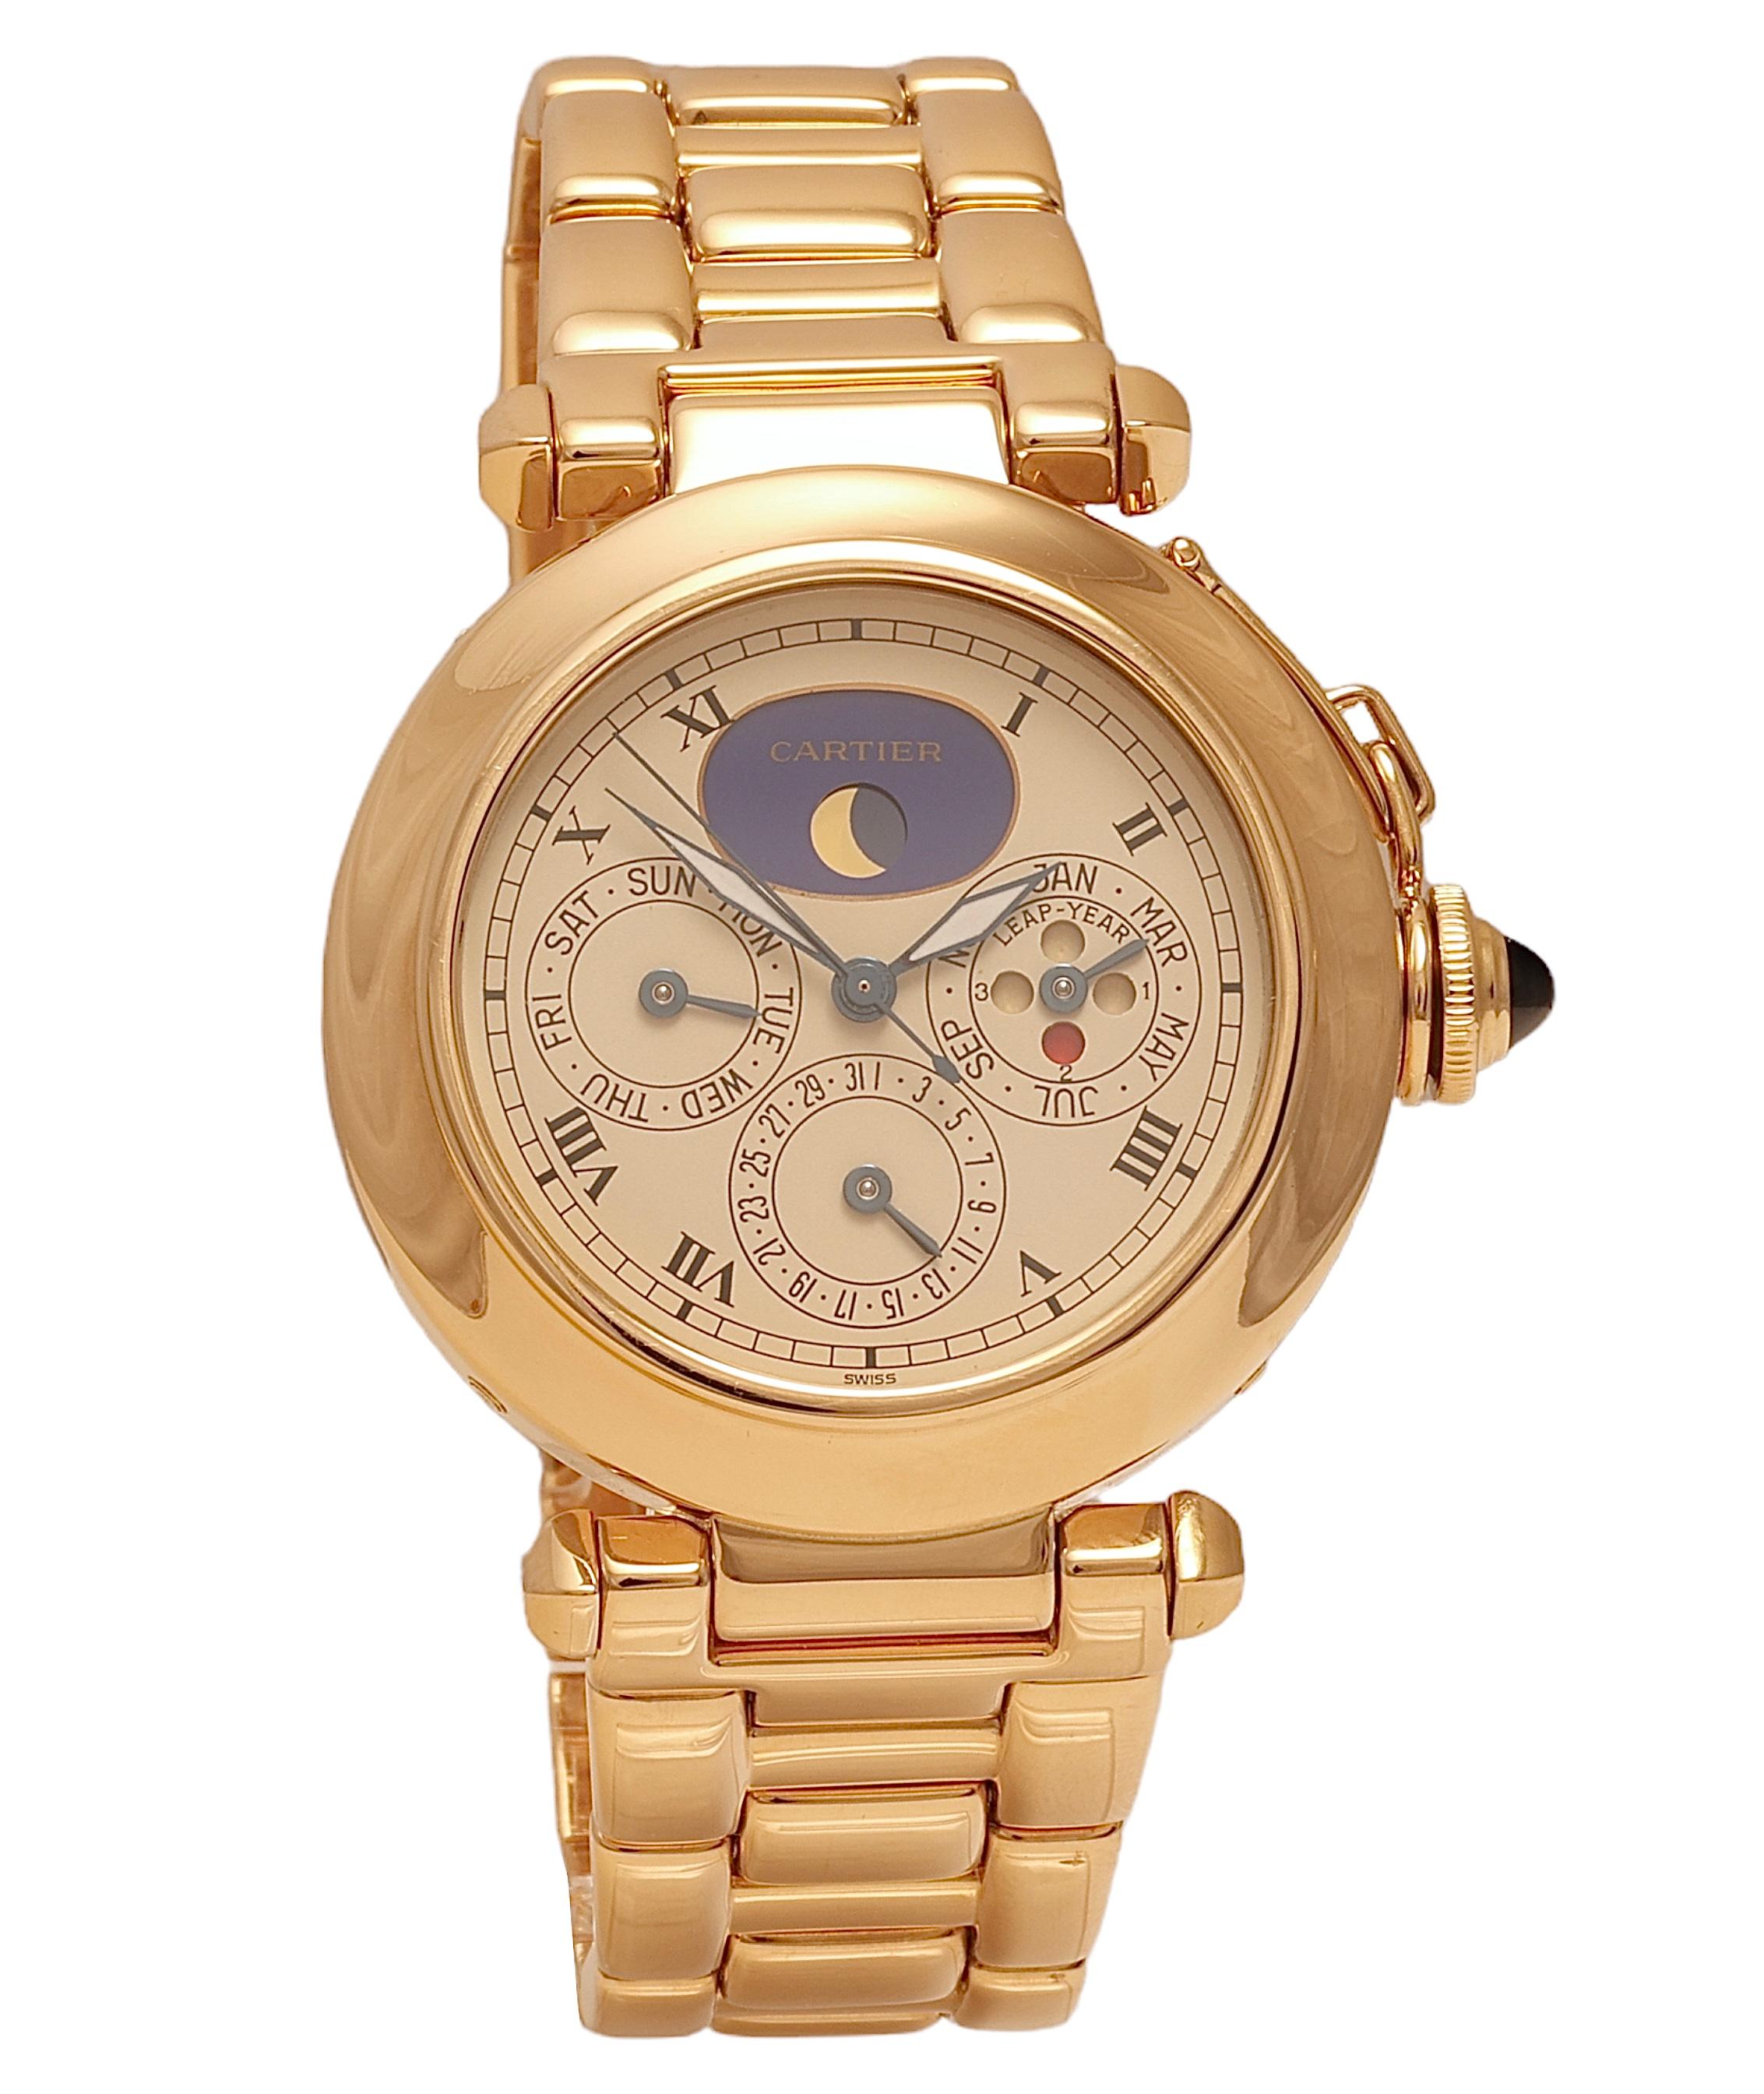 18 Kt Cartier Pasha Perpetual Calendar Wrist Watch, Day Date Month Moon Phase

Reference Nr 30003

Material Case & Strap: 18 Kt Solid Gold

Case : 38 mm

Weight : 166.5 Gram

Strap : 18 Kt Gold Cartier Strap with Gold Folding Buckle ,will fit a 19.5